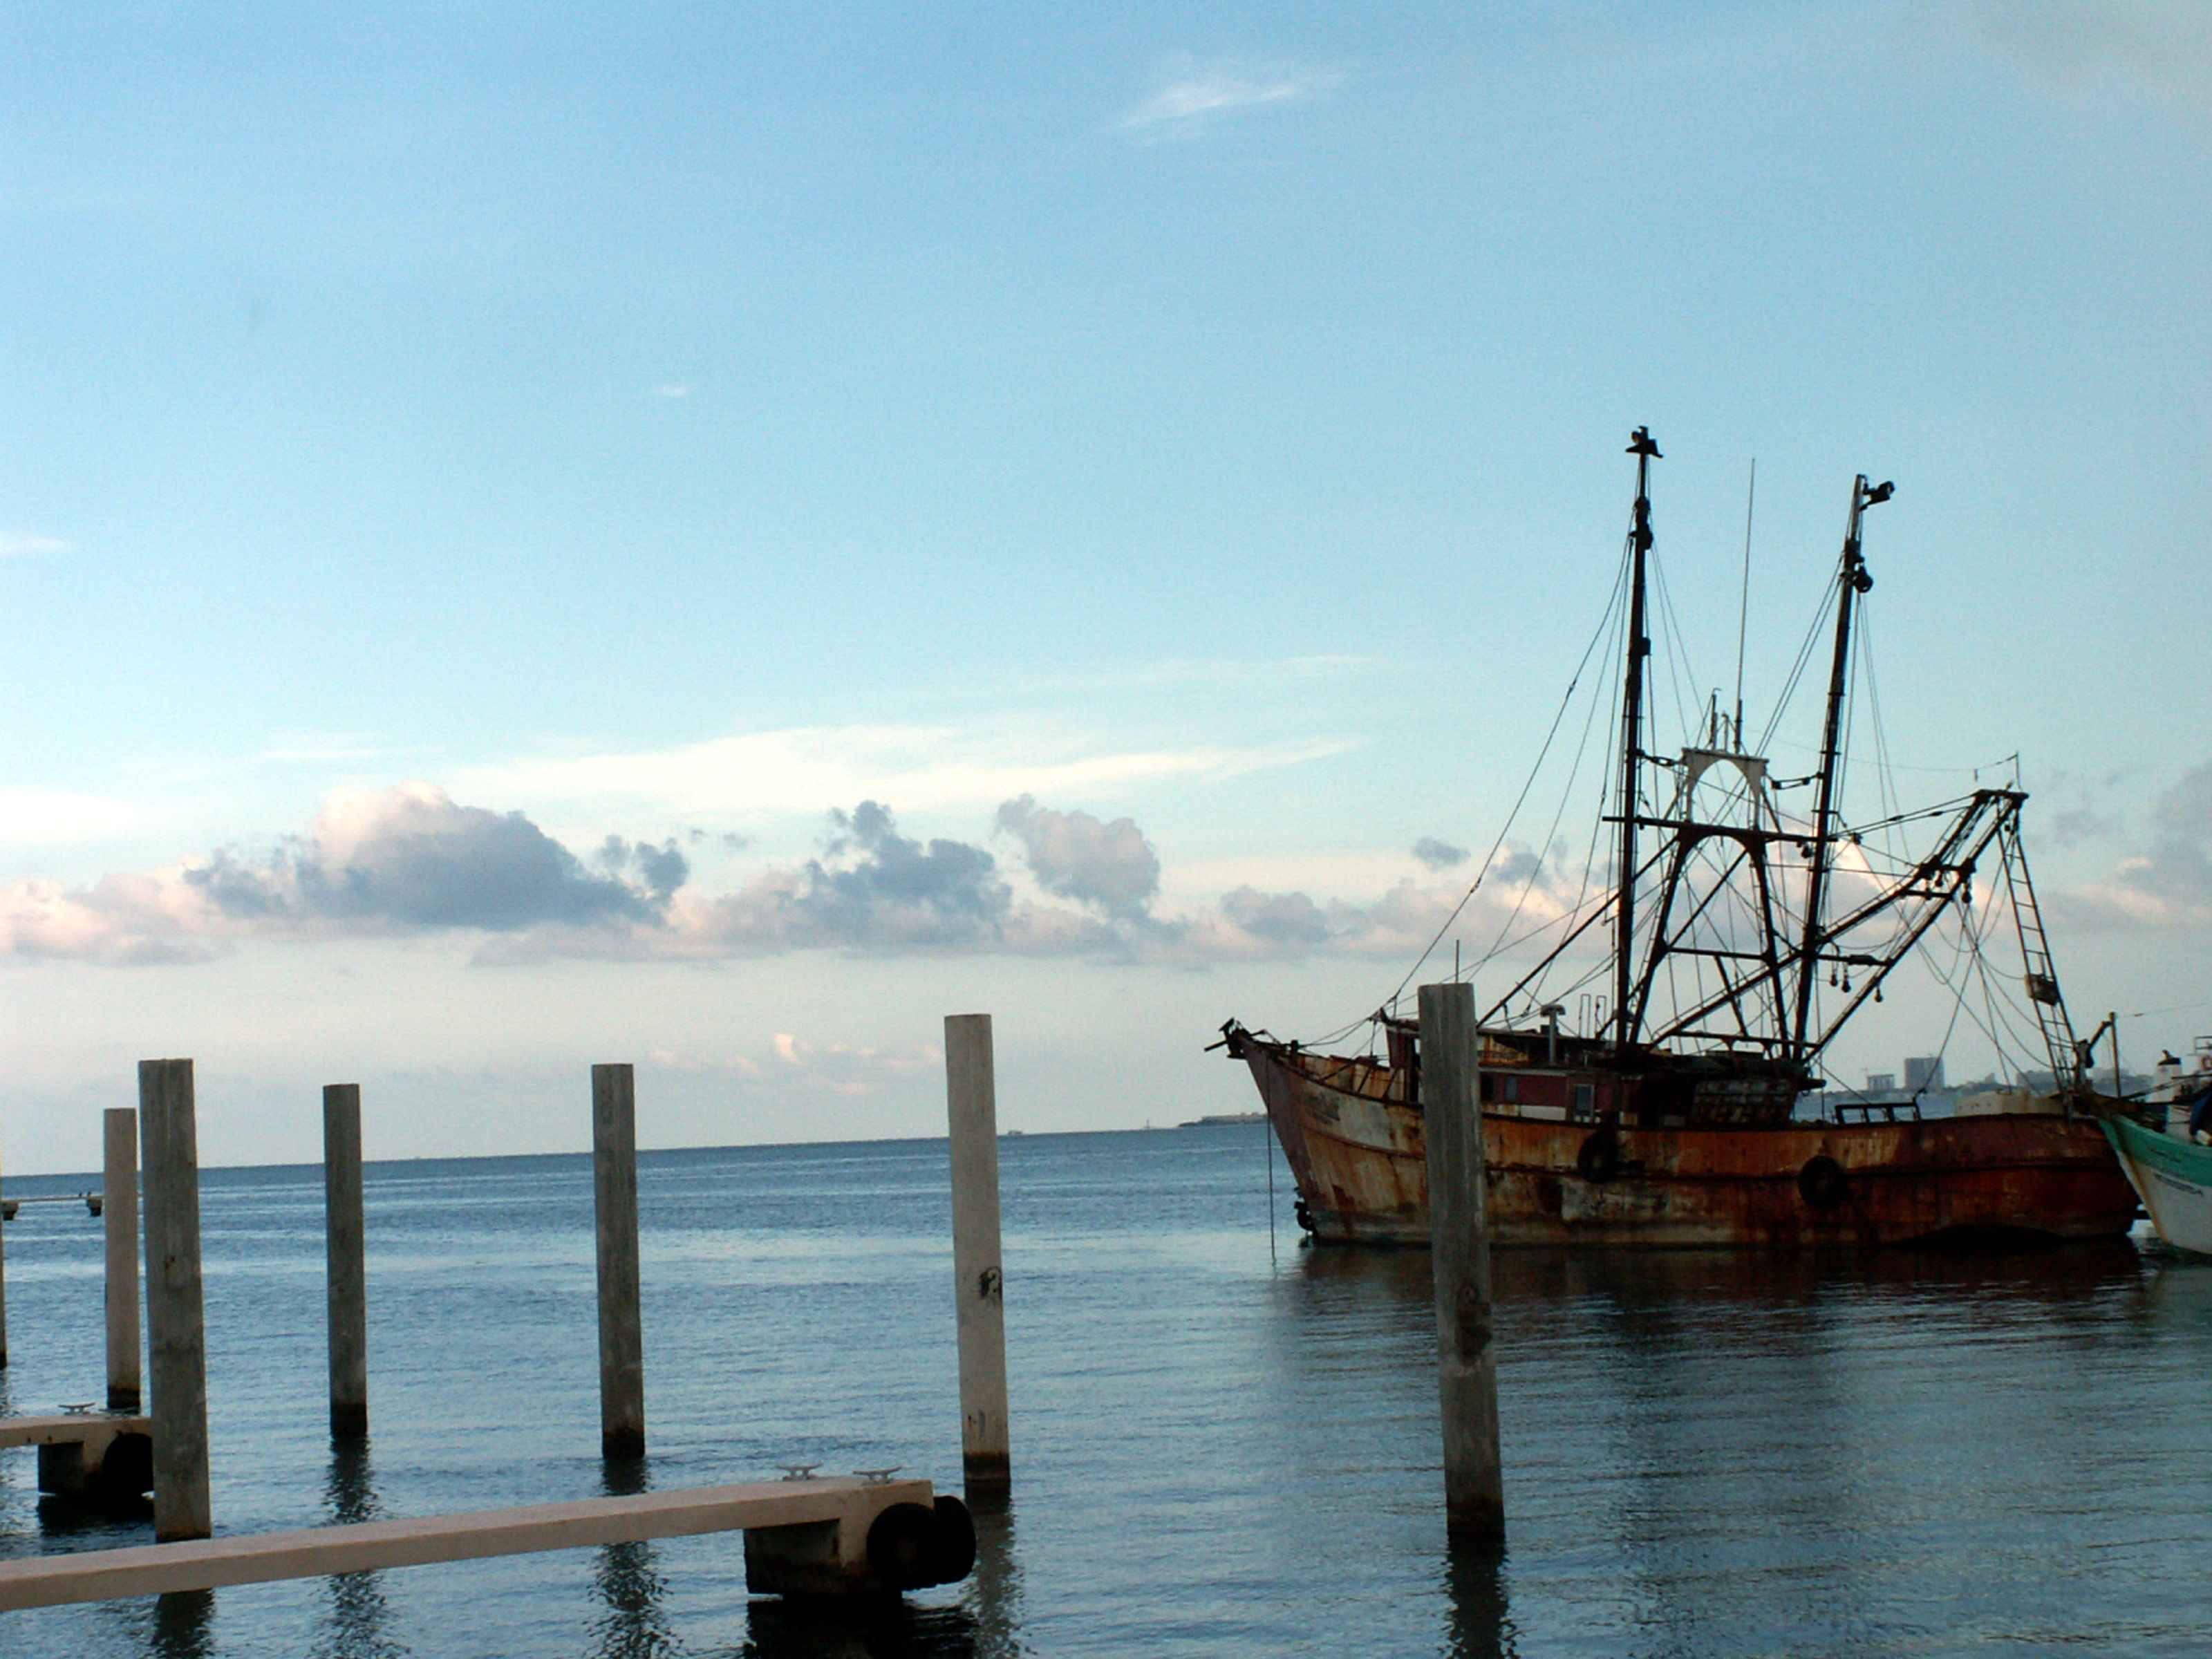 File:Old rusty fishing boat moored in the harbor.jpg - Wikimedia Commons